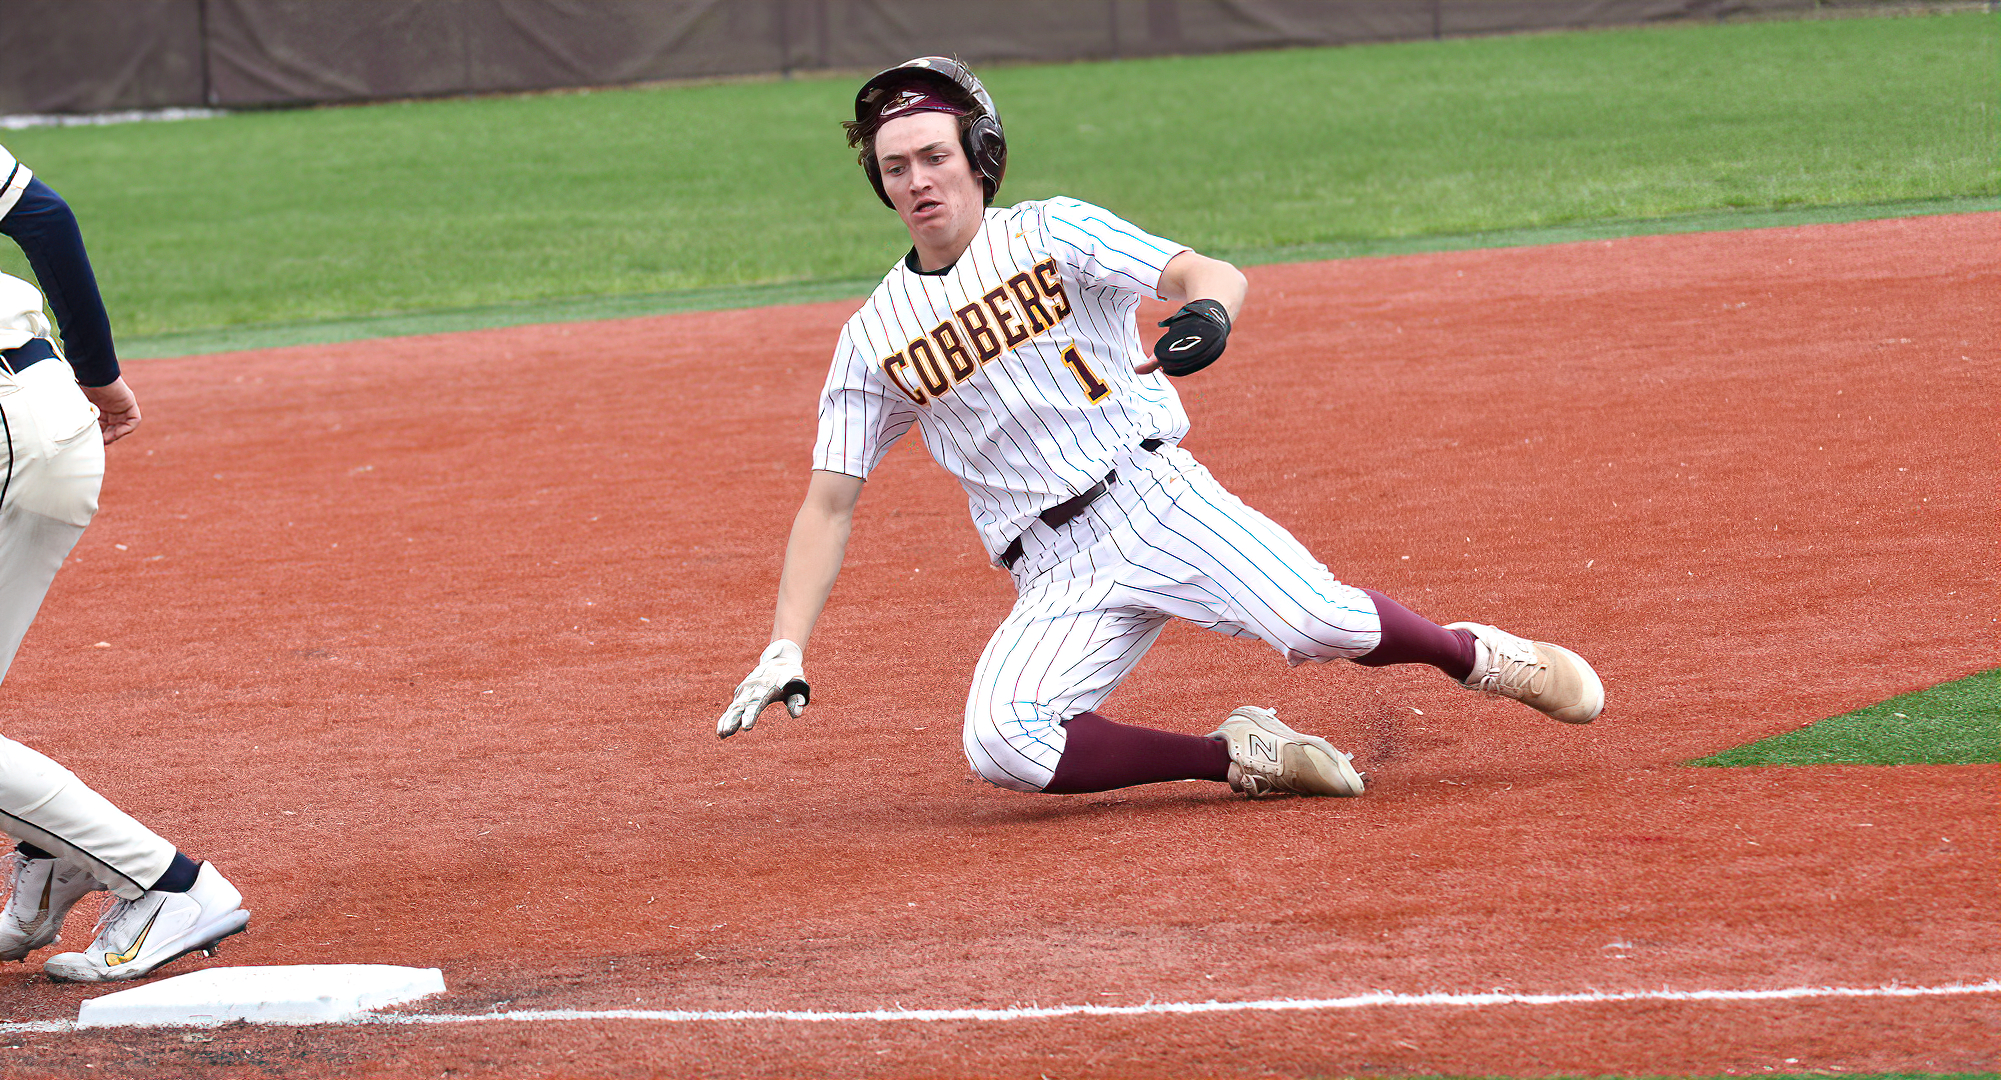 Caiden Kjelstrom was one of two Cobbers to have a hit in both games of the Cobbers' MIAC-opener twinbill at St. Olaf.